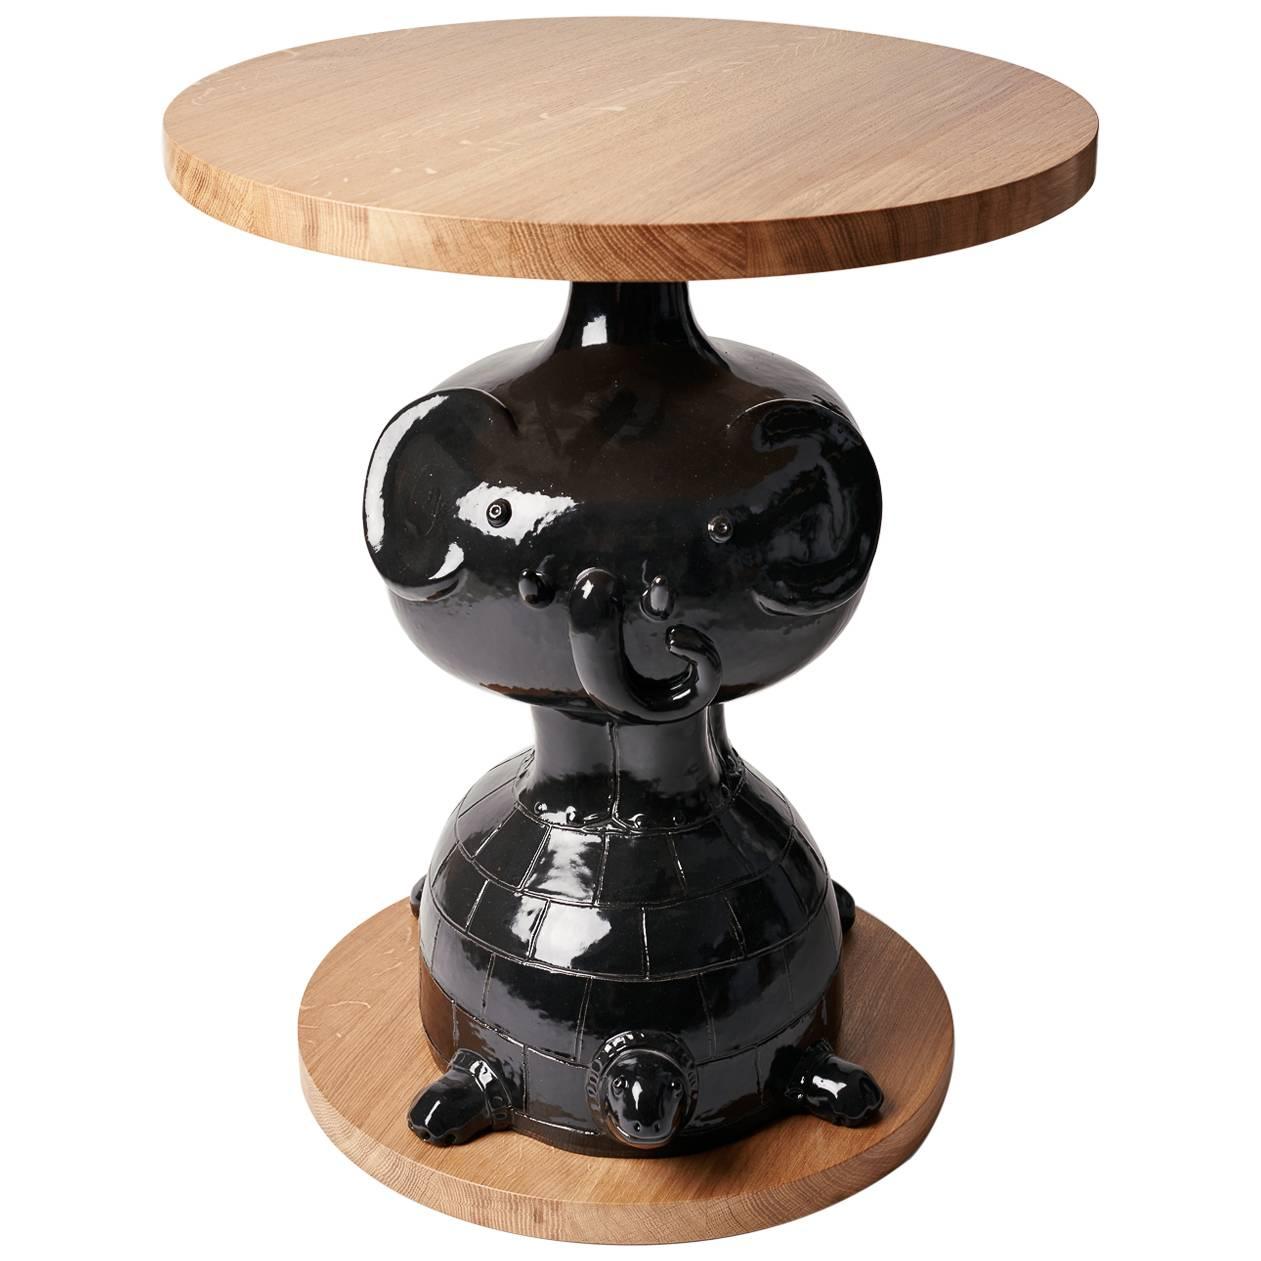 Oak and Ceramic "TOTEM" Table by Dalo For Sale